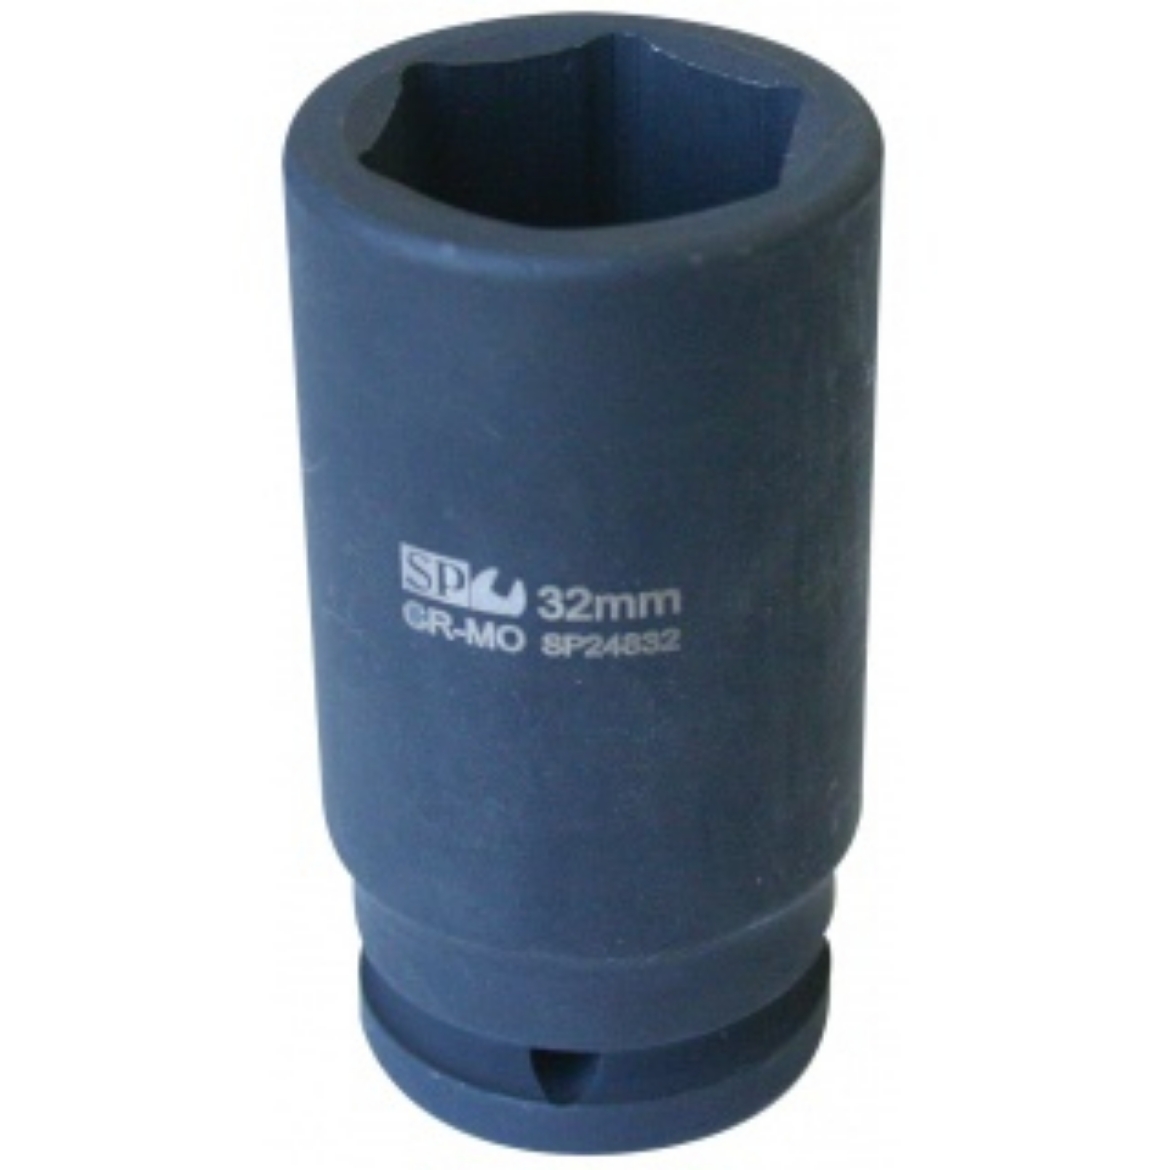 Picture of SOCKET IMPACT 3/4"DR 6PT DEEP METRIC 52MM SP TOOLS